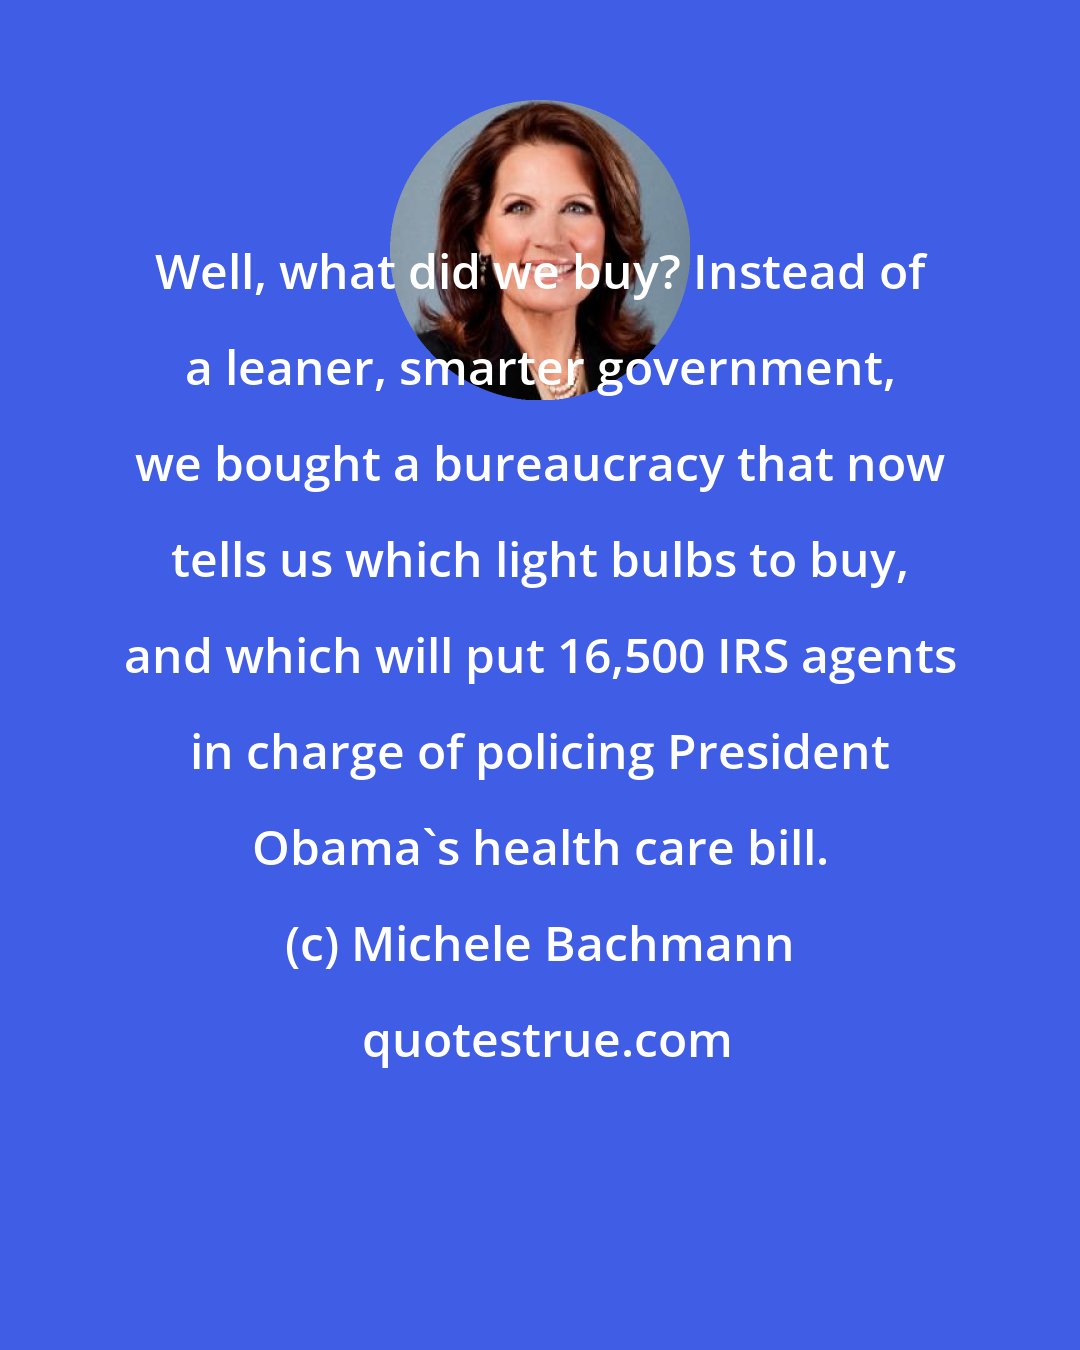 Michele Bachmann: Well, what did we buy? Instead of a leaner, smarter government, we bought a bureaucracy that now tells us which light bulbs to buy, and which will put 16,500 IRS agents in charge of policing President Obama's health care bill.